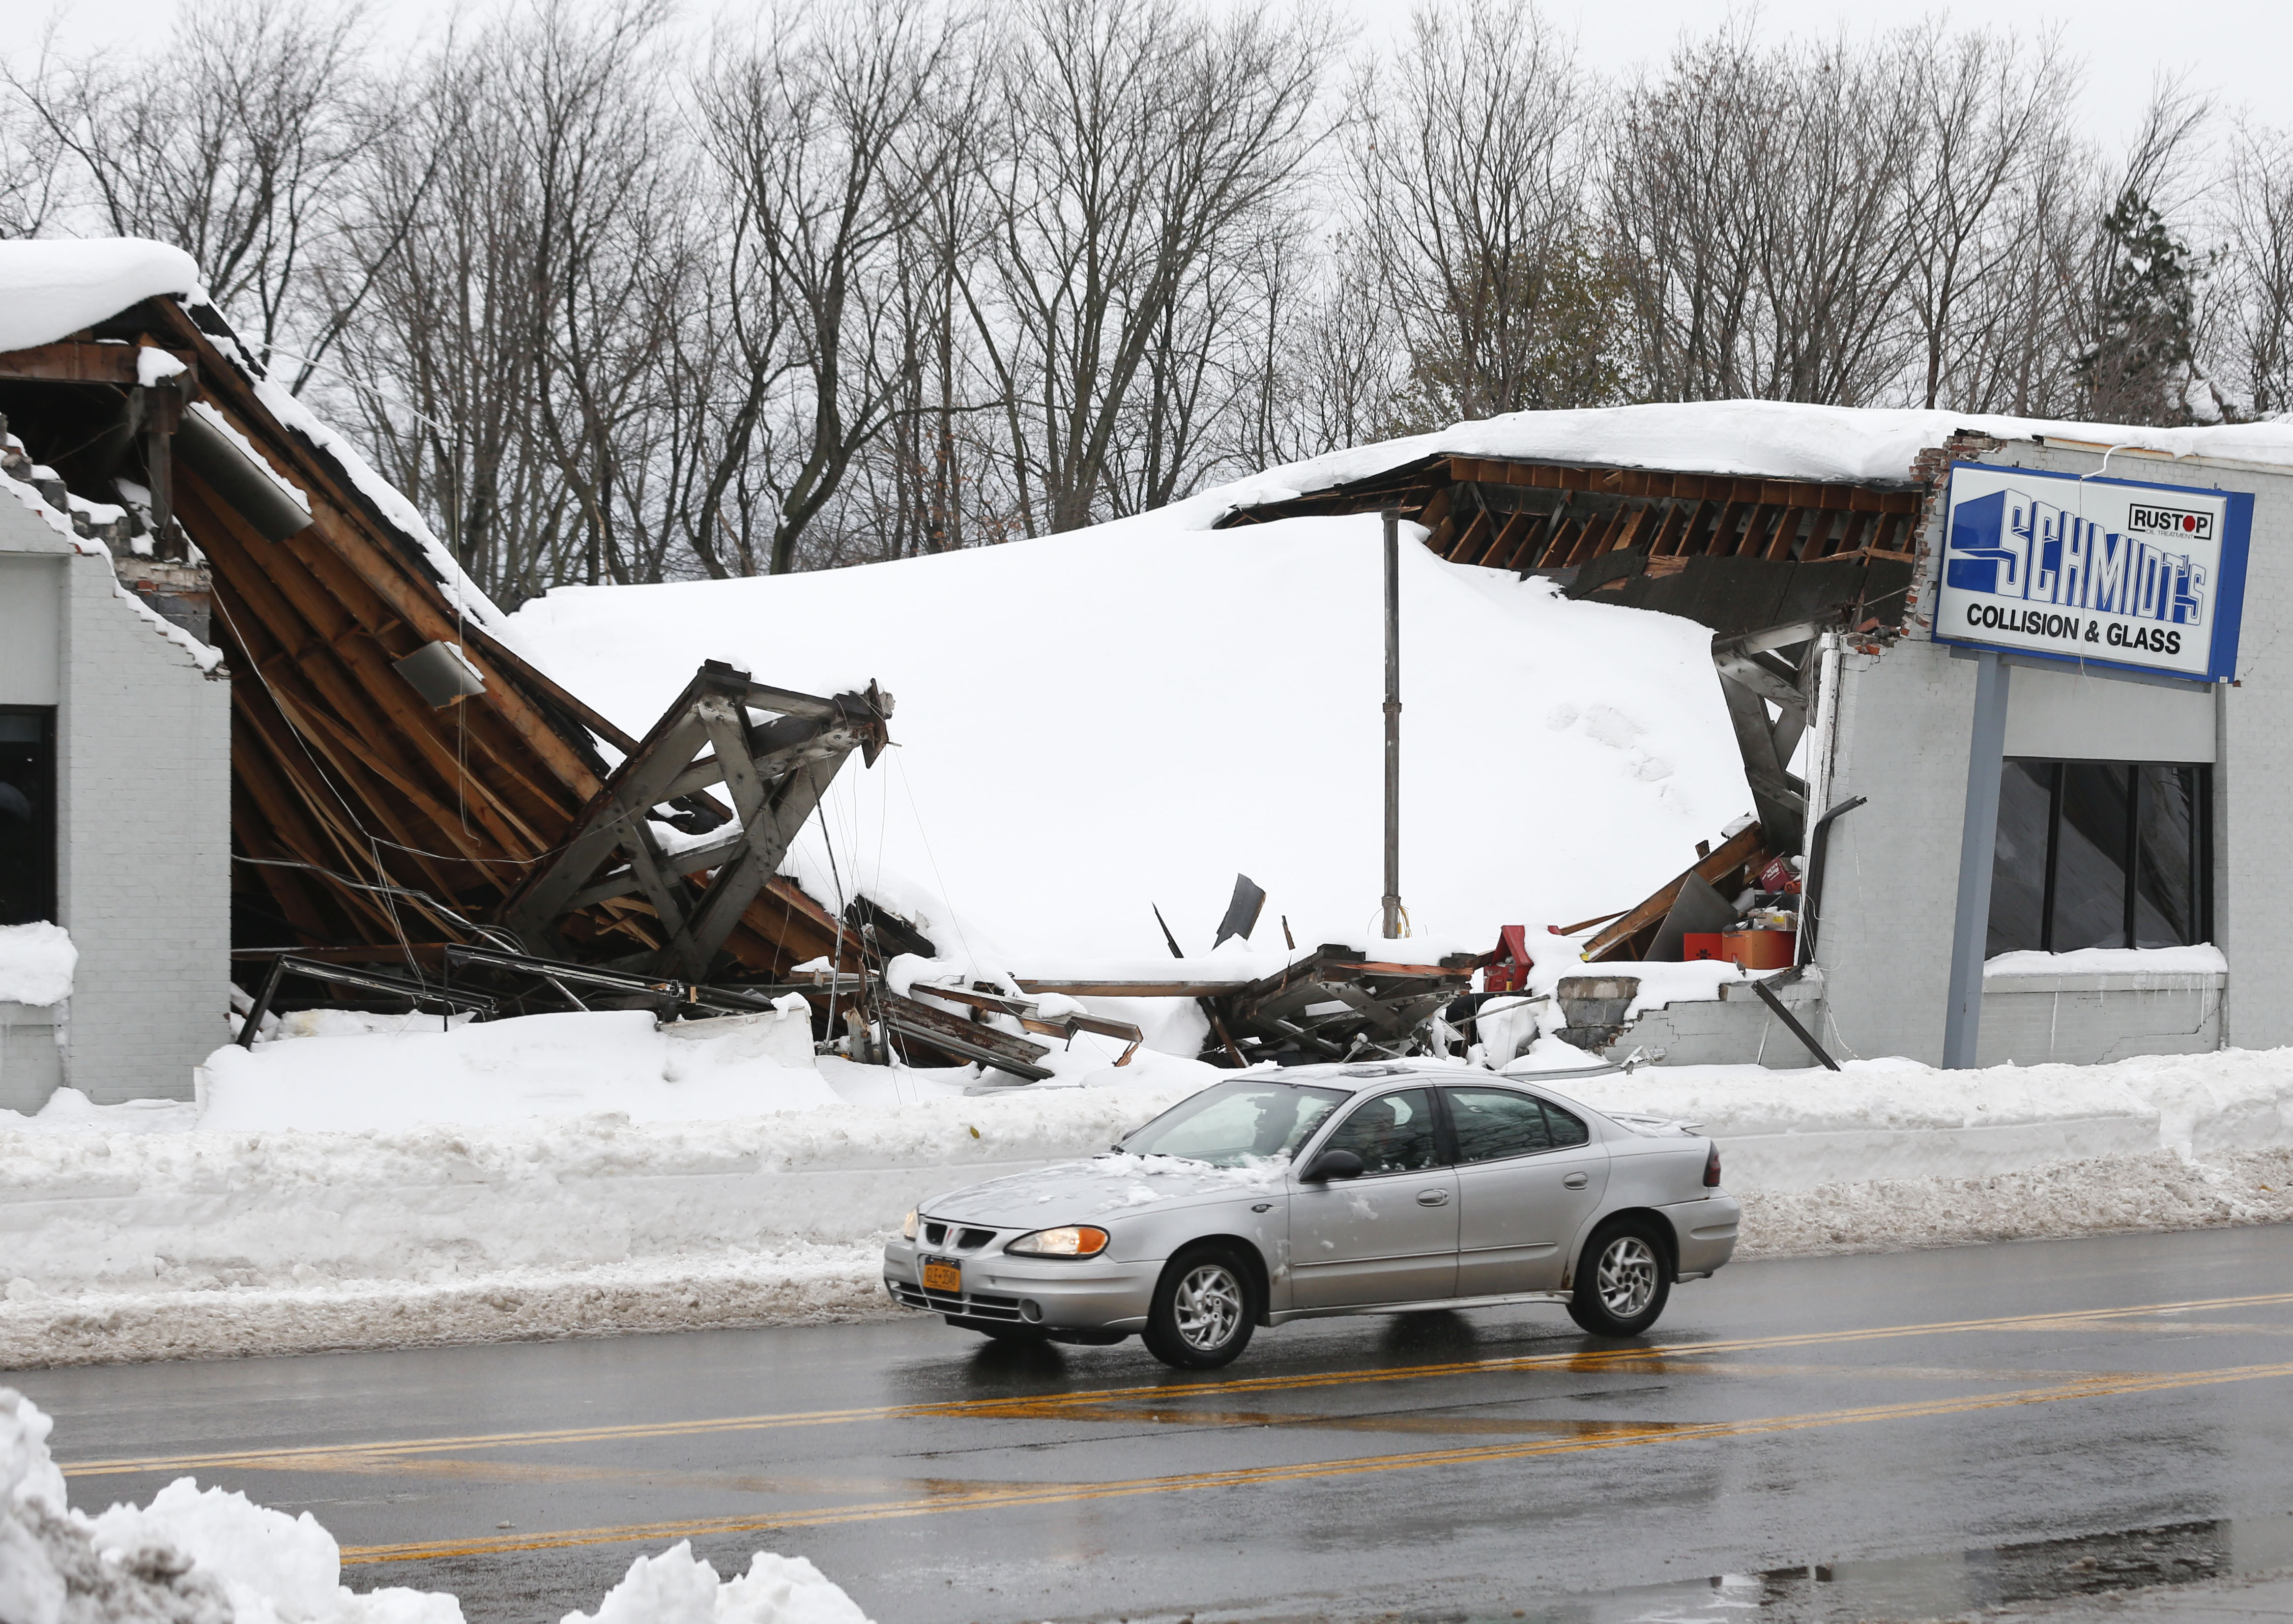 Roof collapses from weight of snow